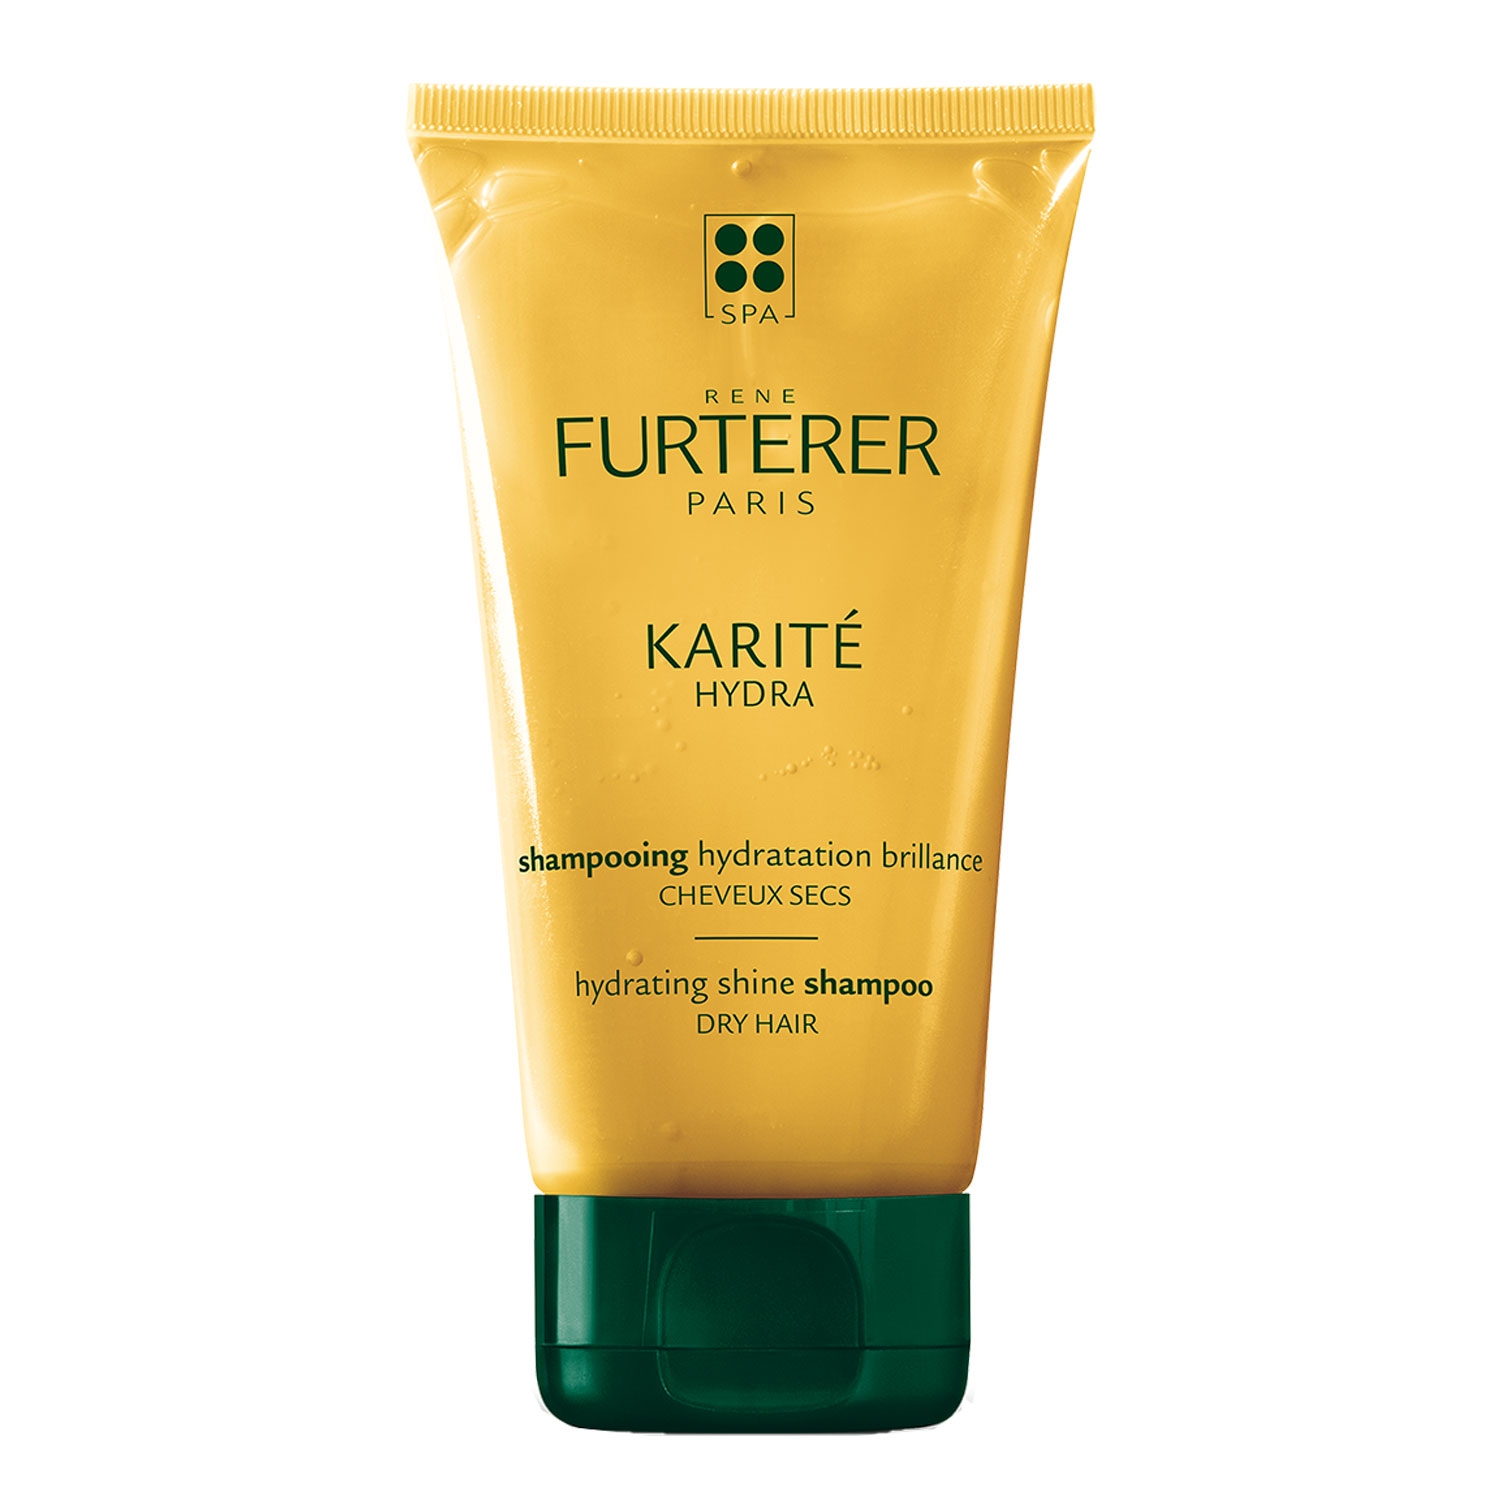 Product image from Karité Hydra - Feuchtigkeits-Shampoo